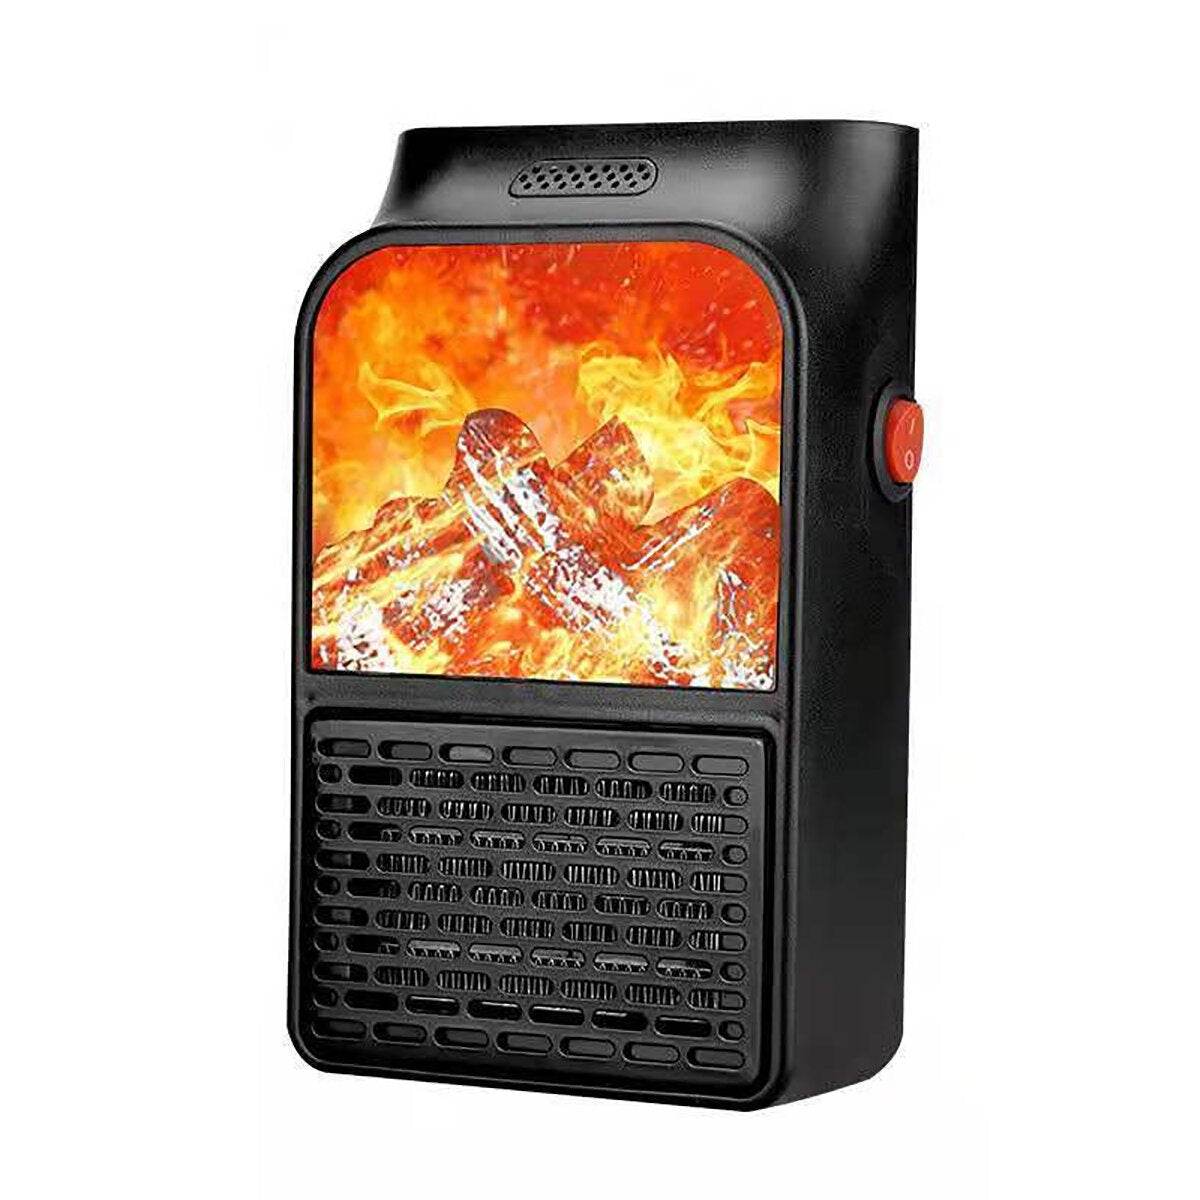 Portable Electric Heater Fireplace Radiator 3D Flame Warmer Low Noise 3S Rapid Heating for Home Office